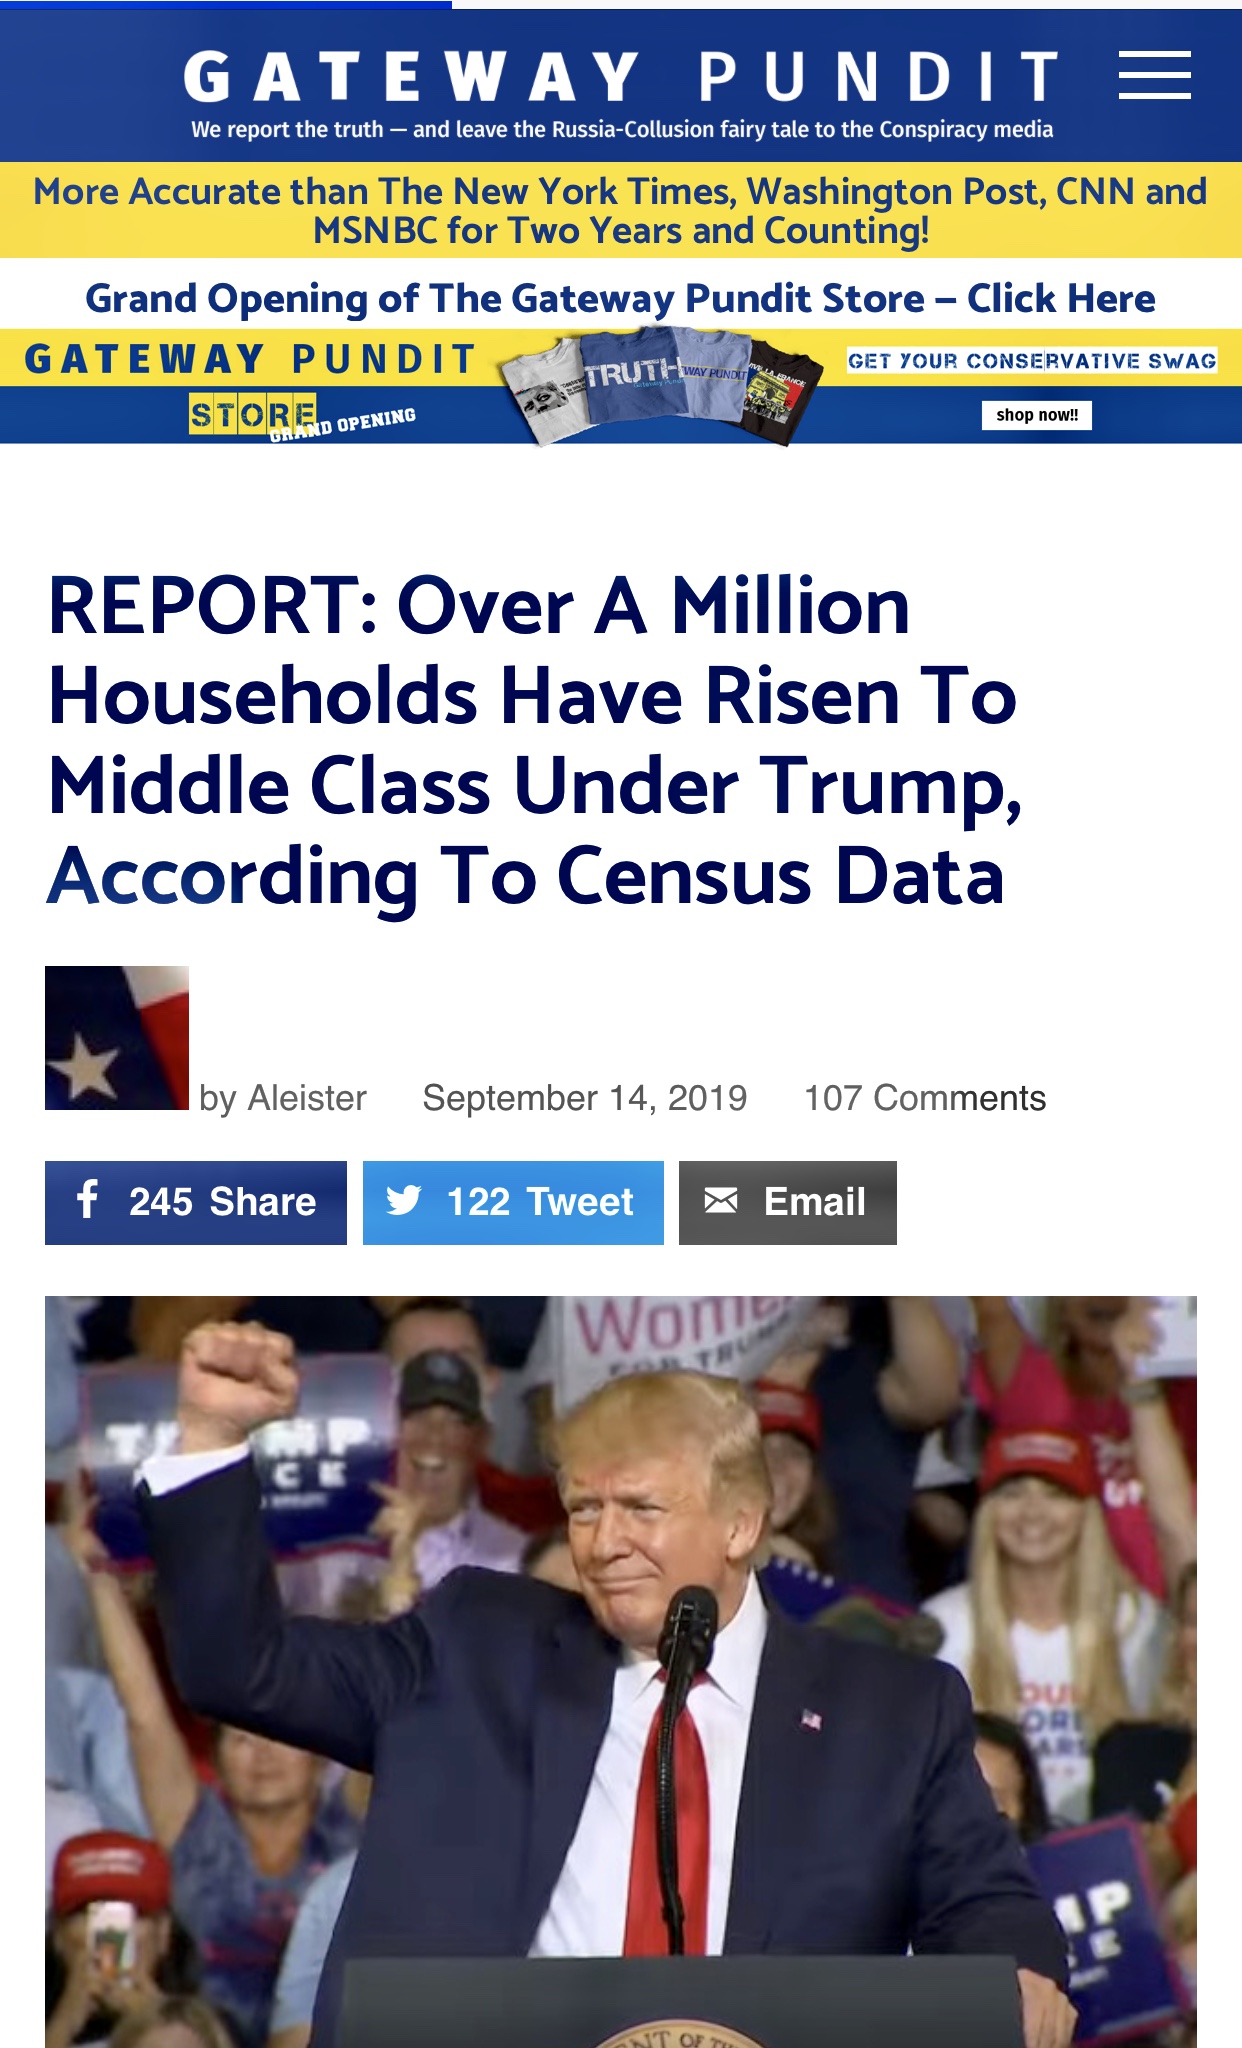 REPORT: Over A Million Households Have Risen To Middle Class Under Trump, According To Census Data